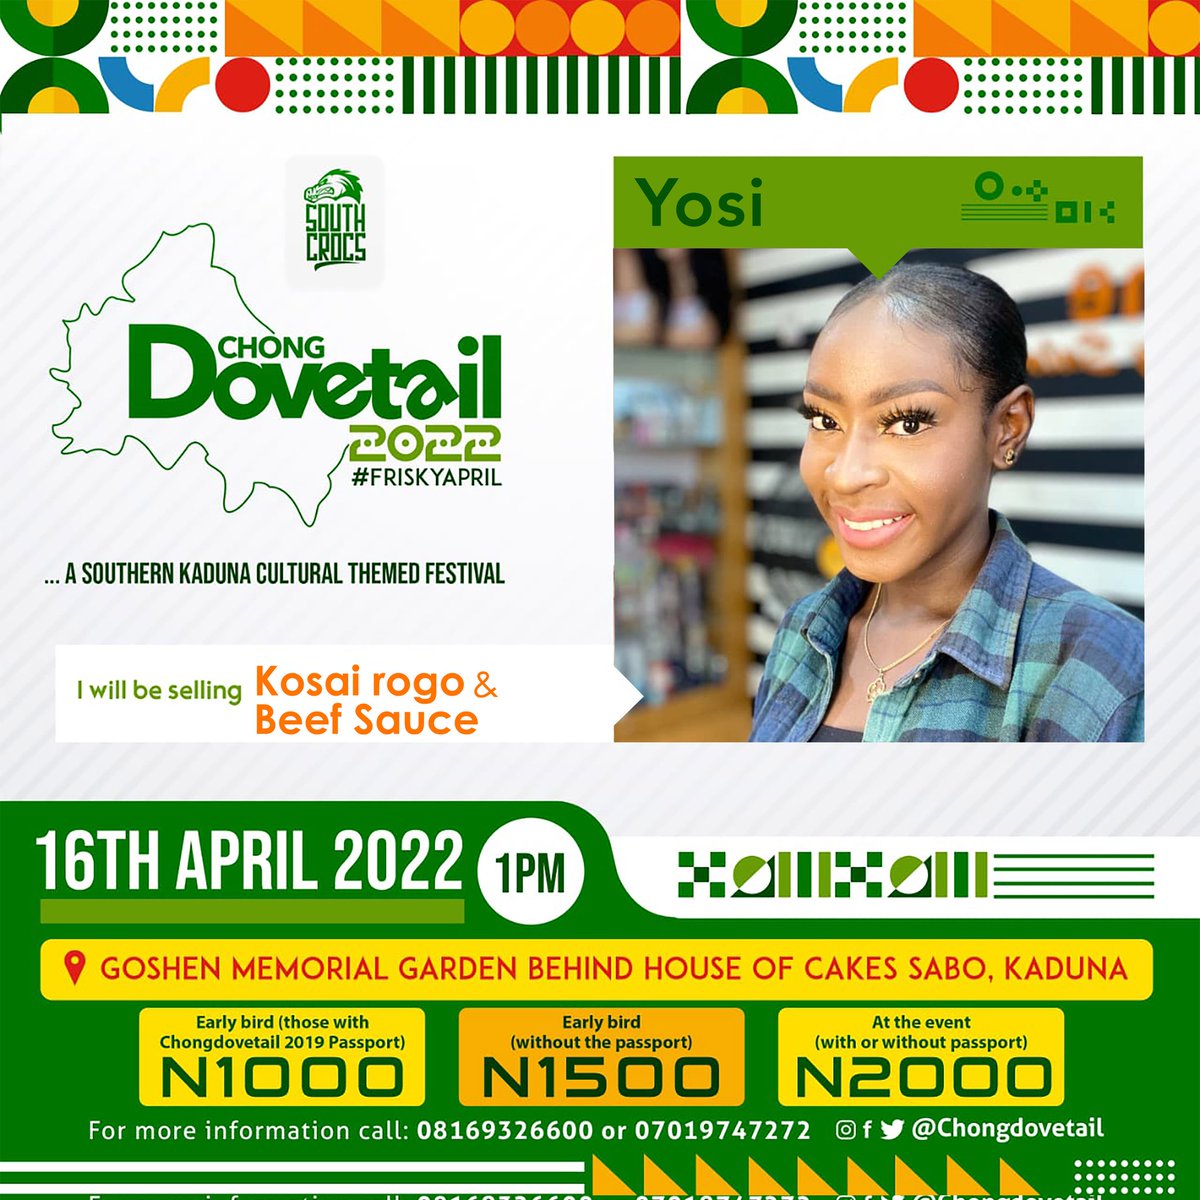 ChongDovetail in 5 days💃💃
And I'm privileged to be a vendor at this great event☺️.
I will be serving you with sumptuous kosai rogo and beef sauce😋, a combo you wouldn't want to miss out on, come to my stall and have a taste of goodness🤭